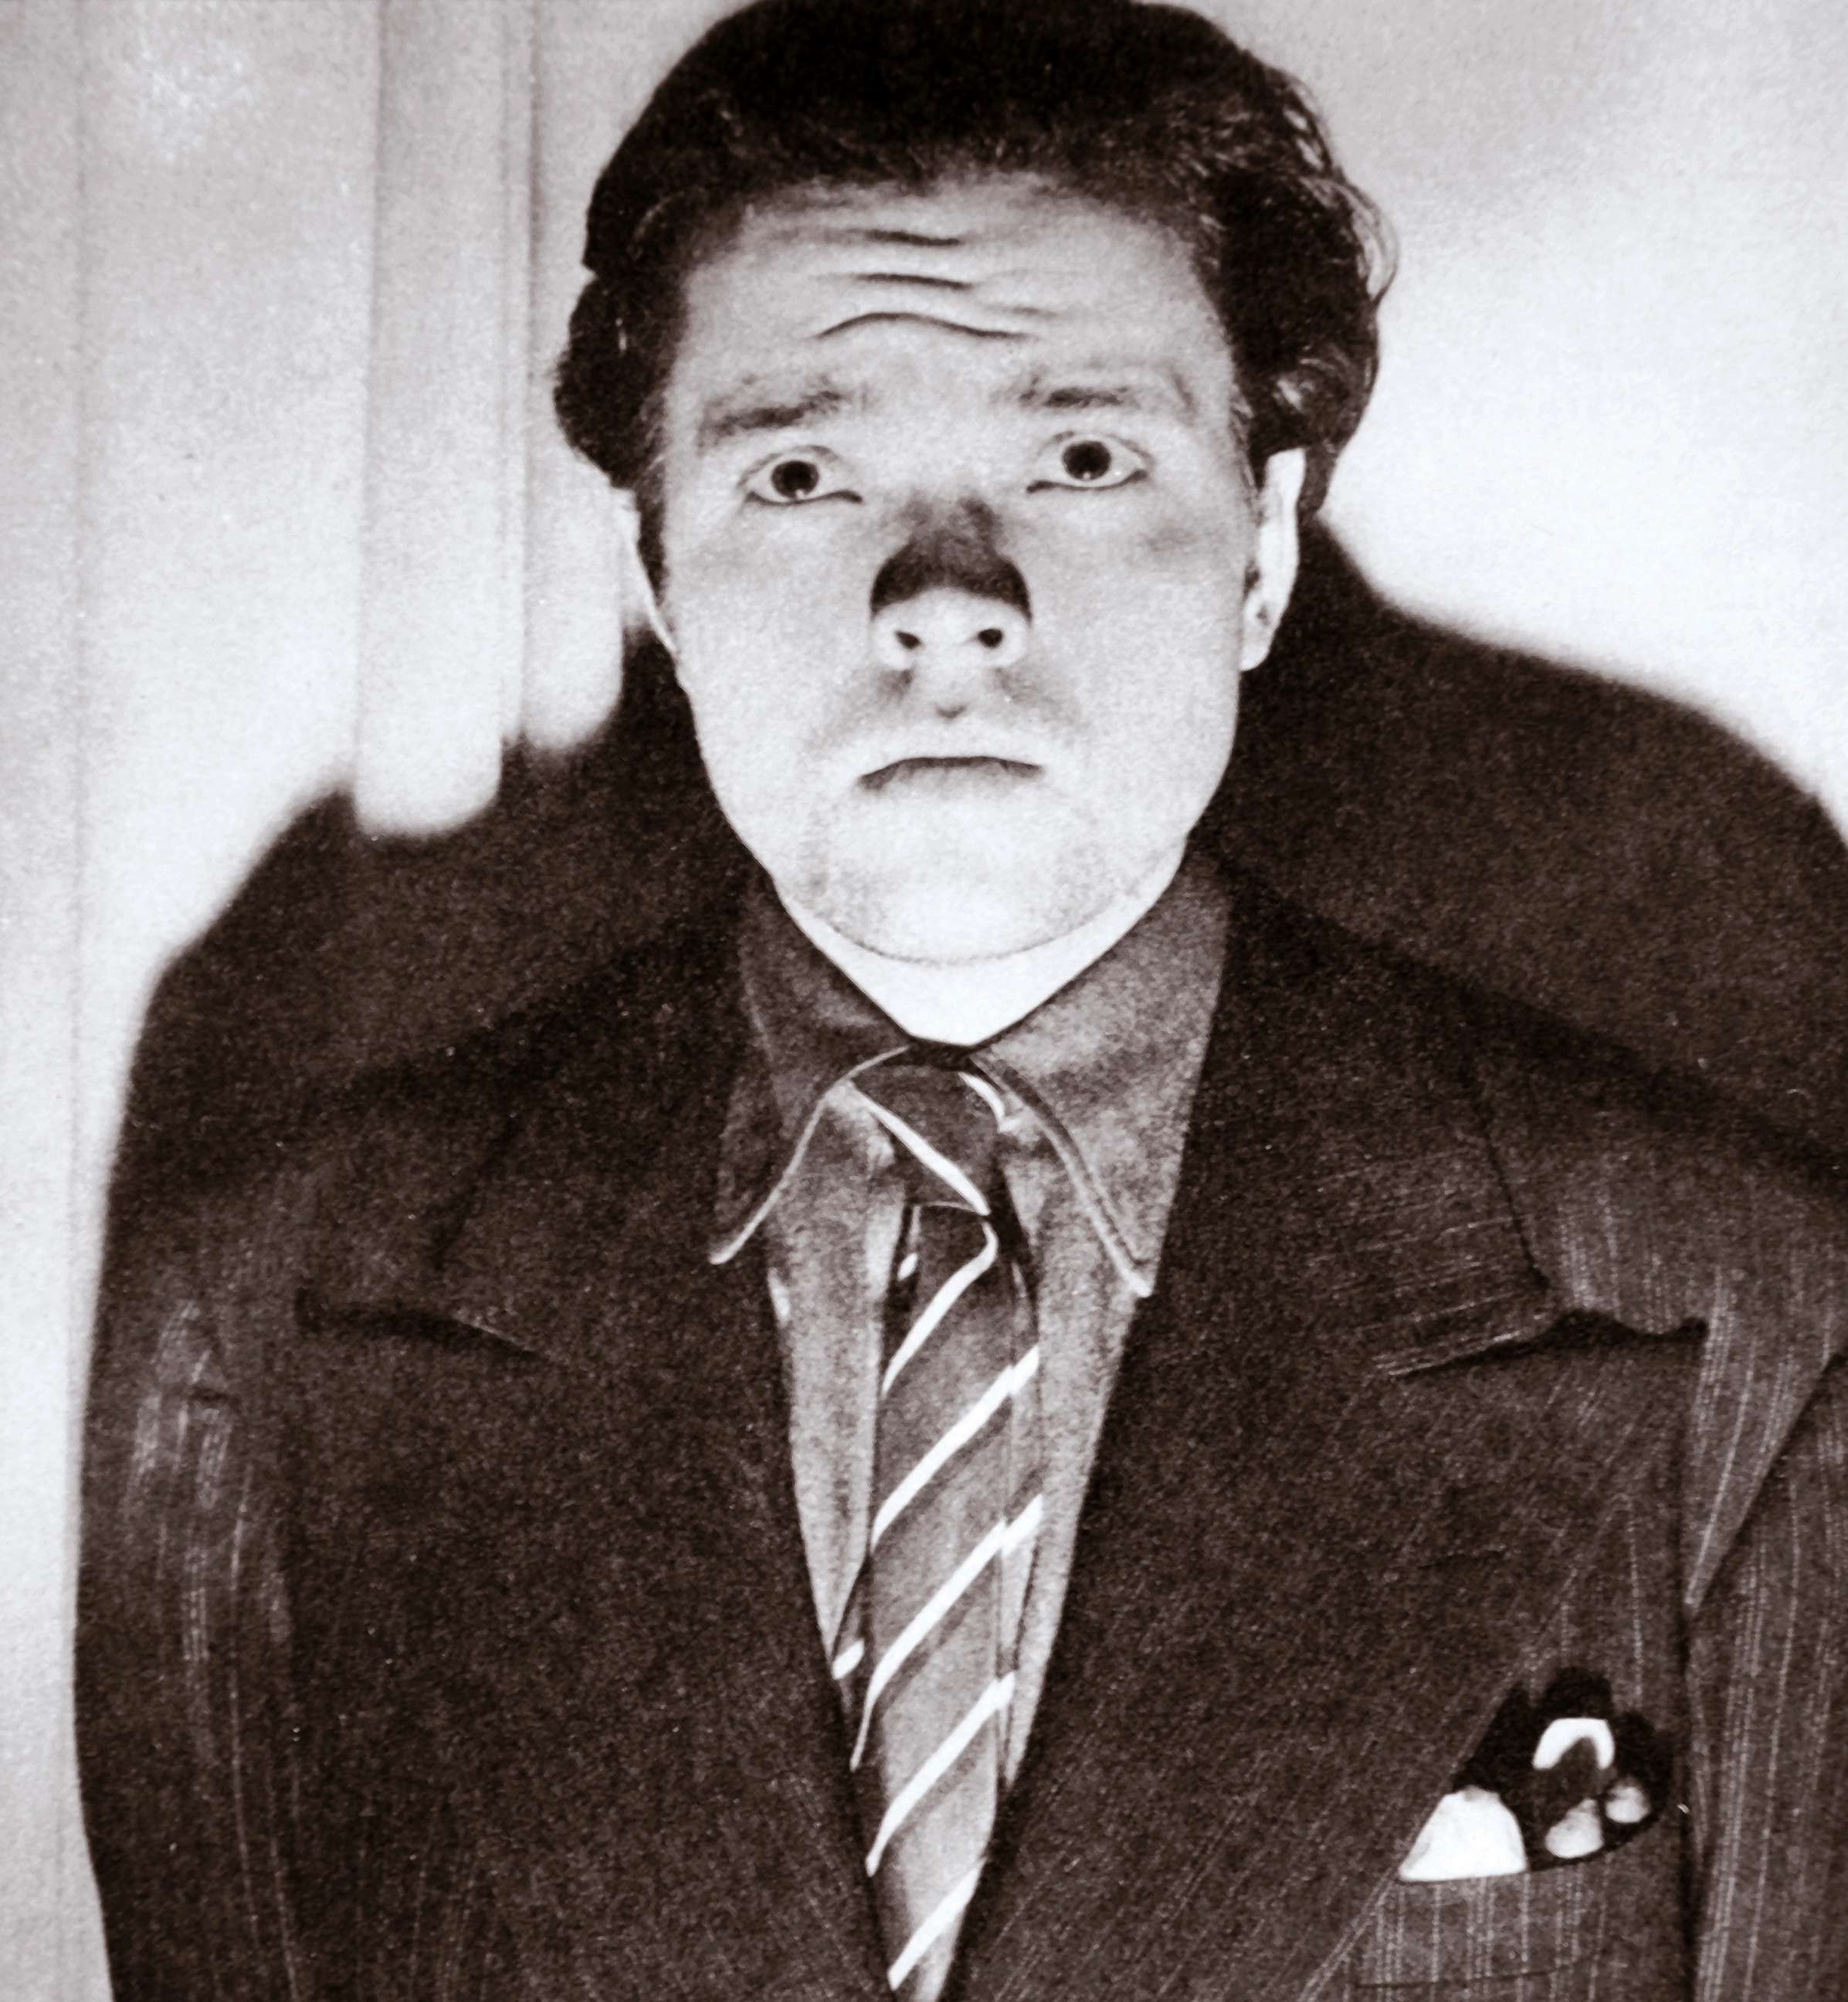 PHOTO: Orson Welles, American actor and film director, Oct. 30, 1938.